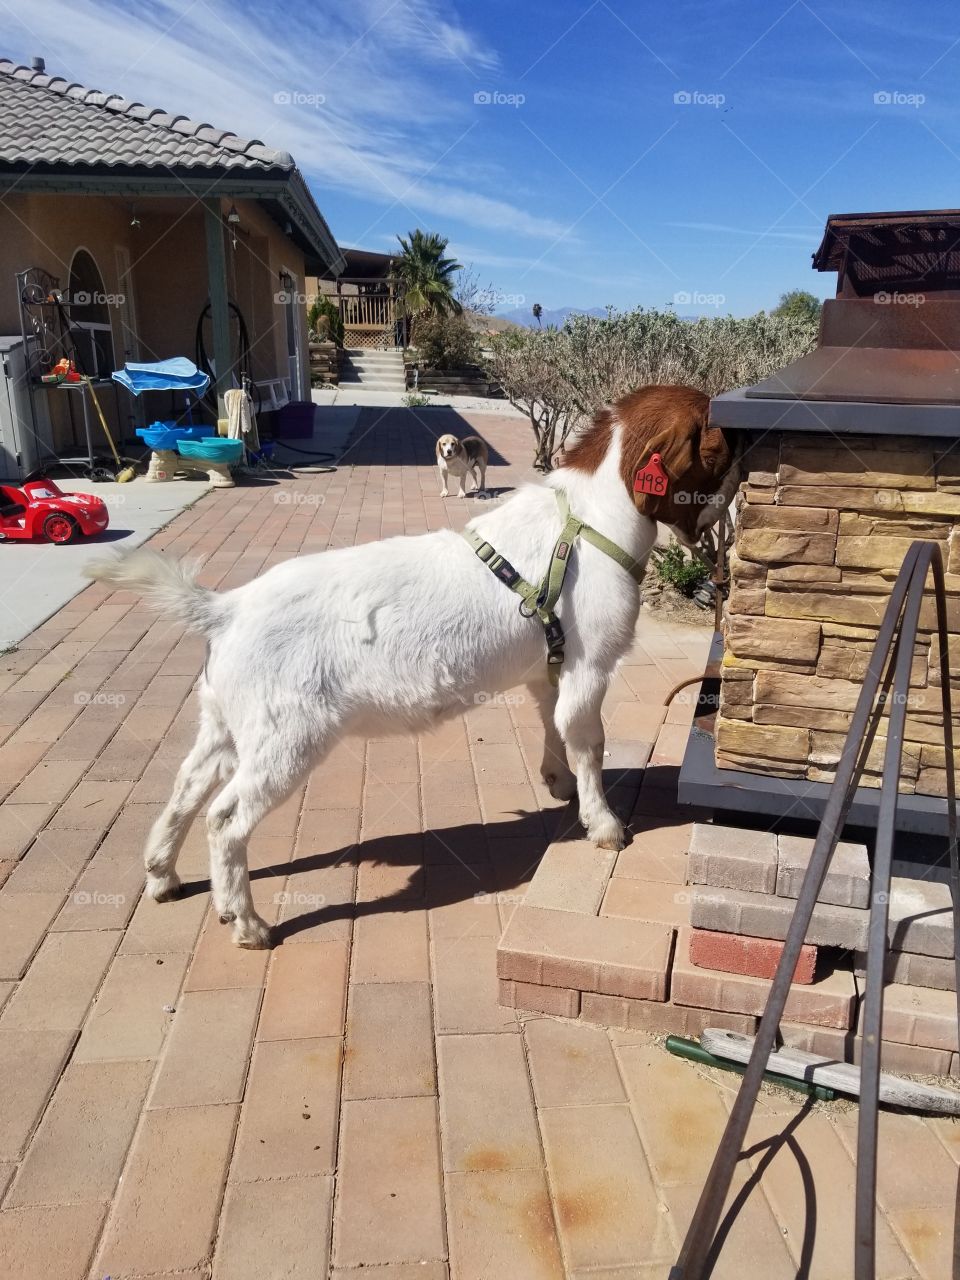 White goat relaxing and eating by fireplace in the back yard in the Mojave desert on a hot Summer day.